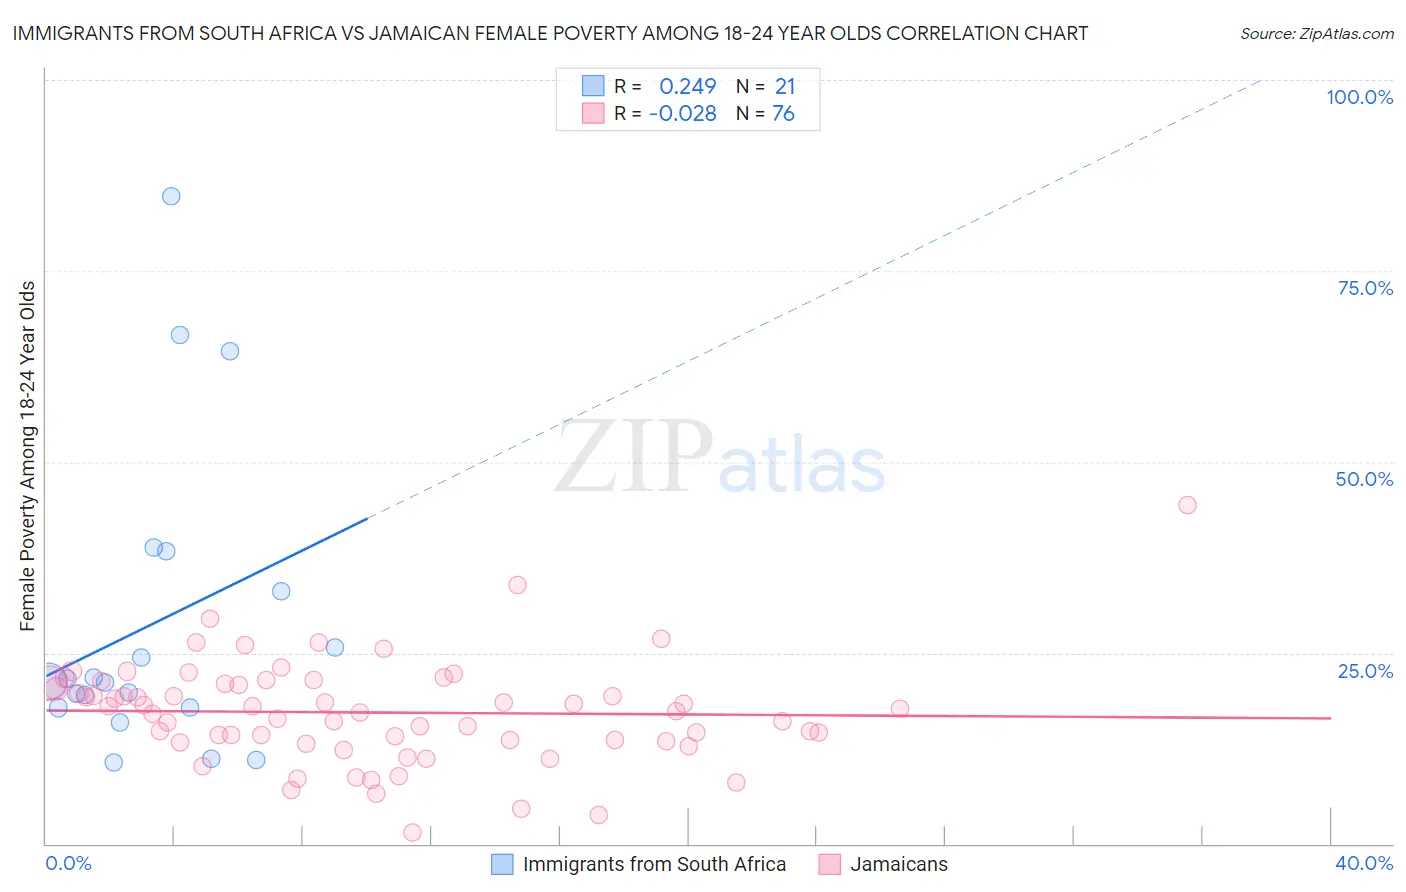 Immigrants from South Africa vs Jamaican Female Poverty Among 18-24 Year Olds